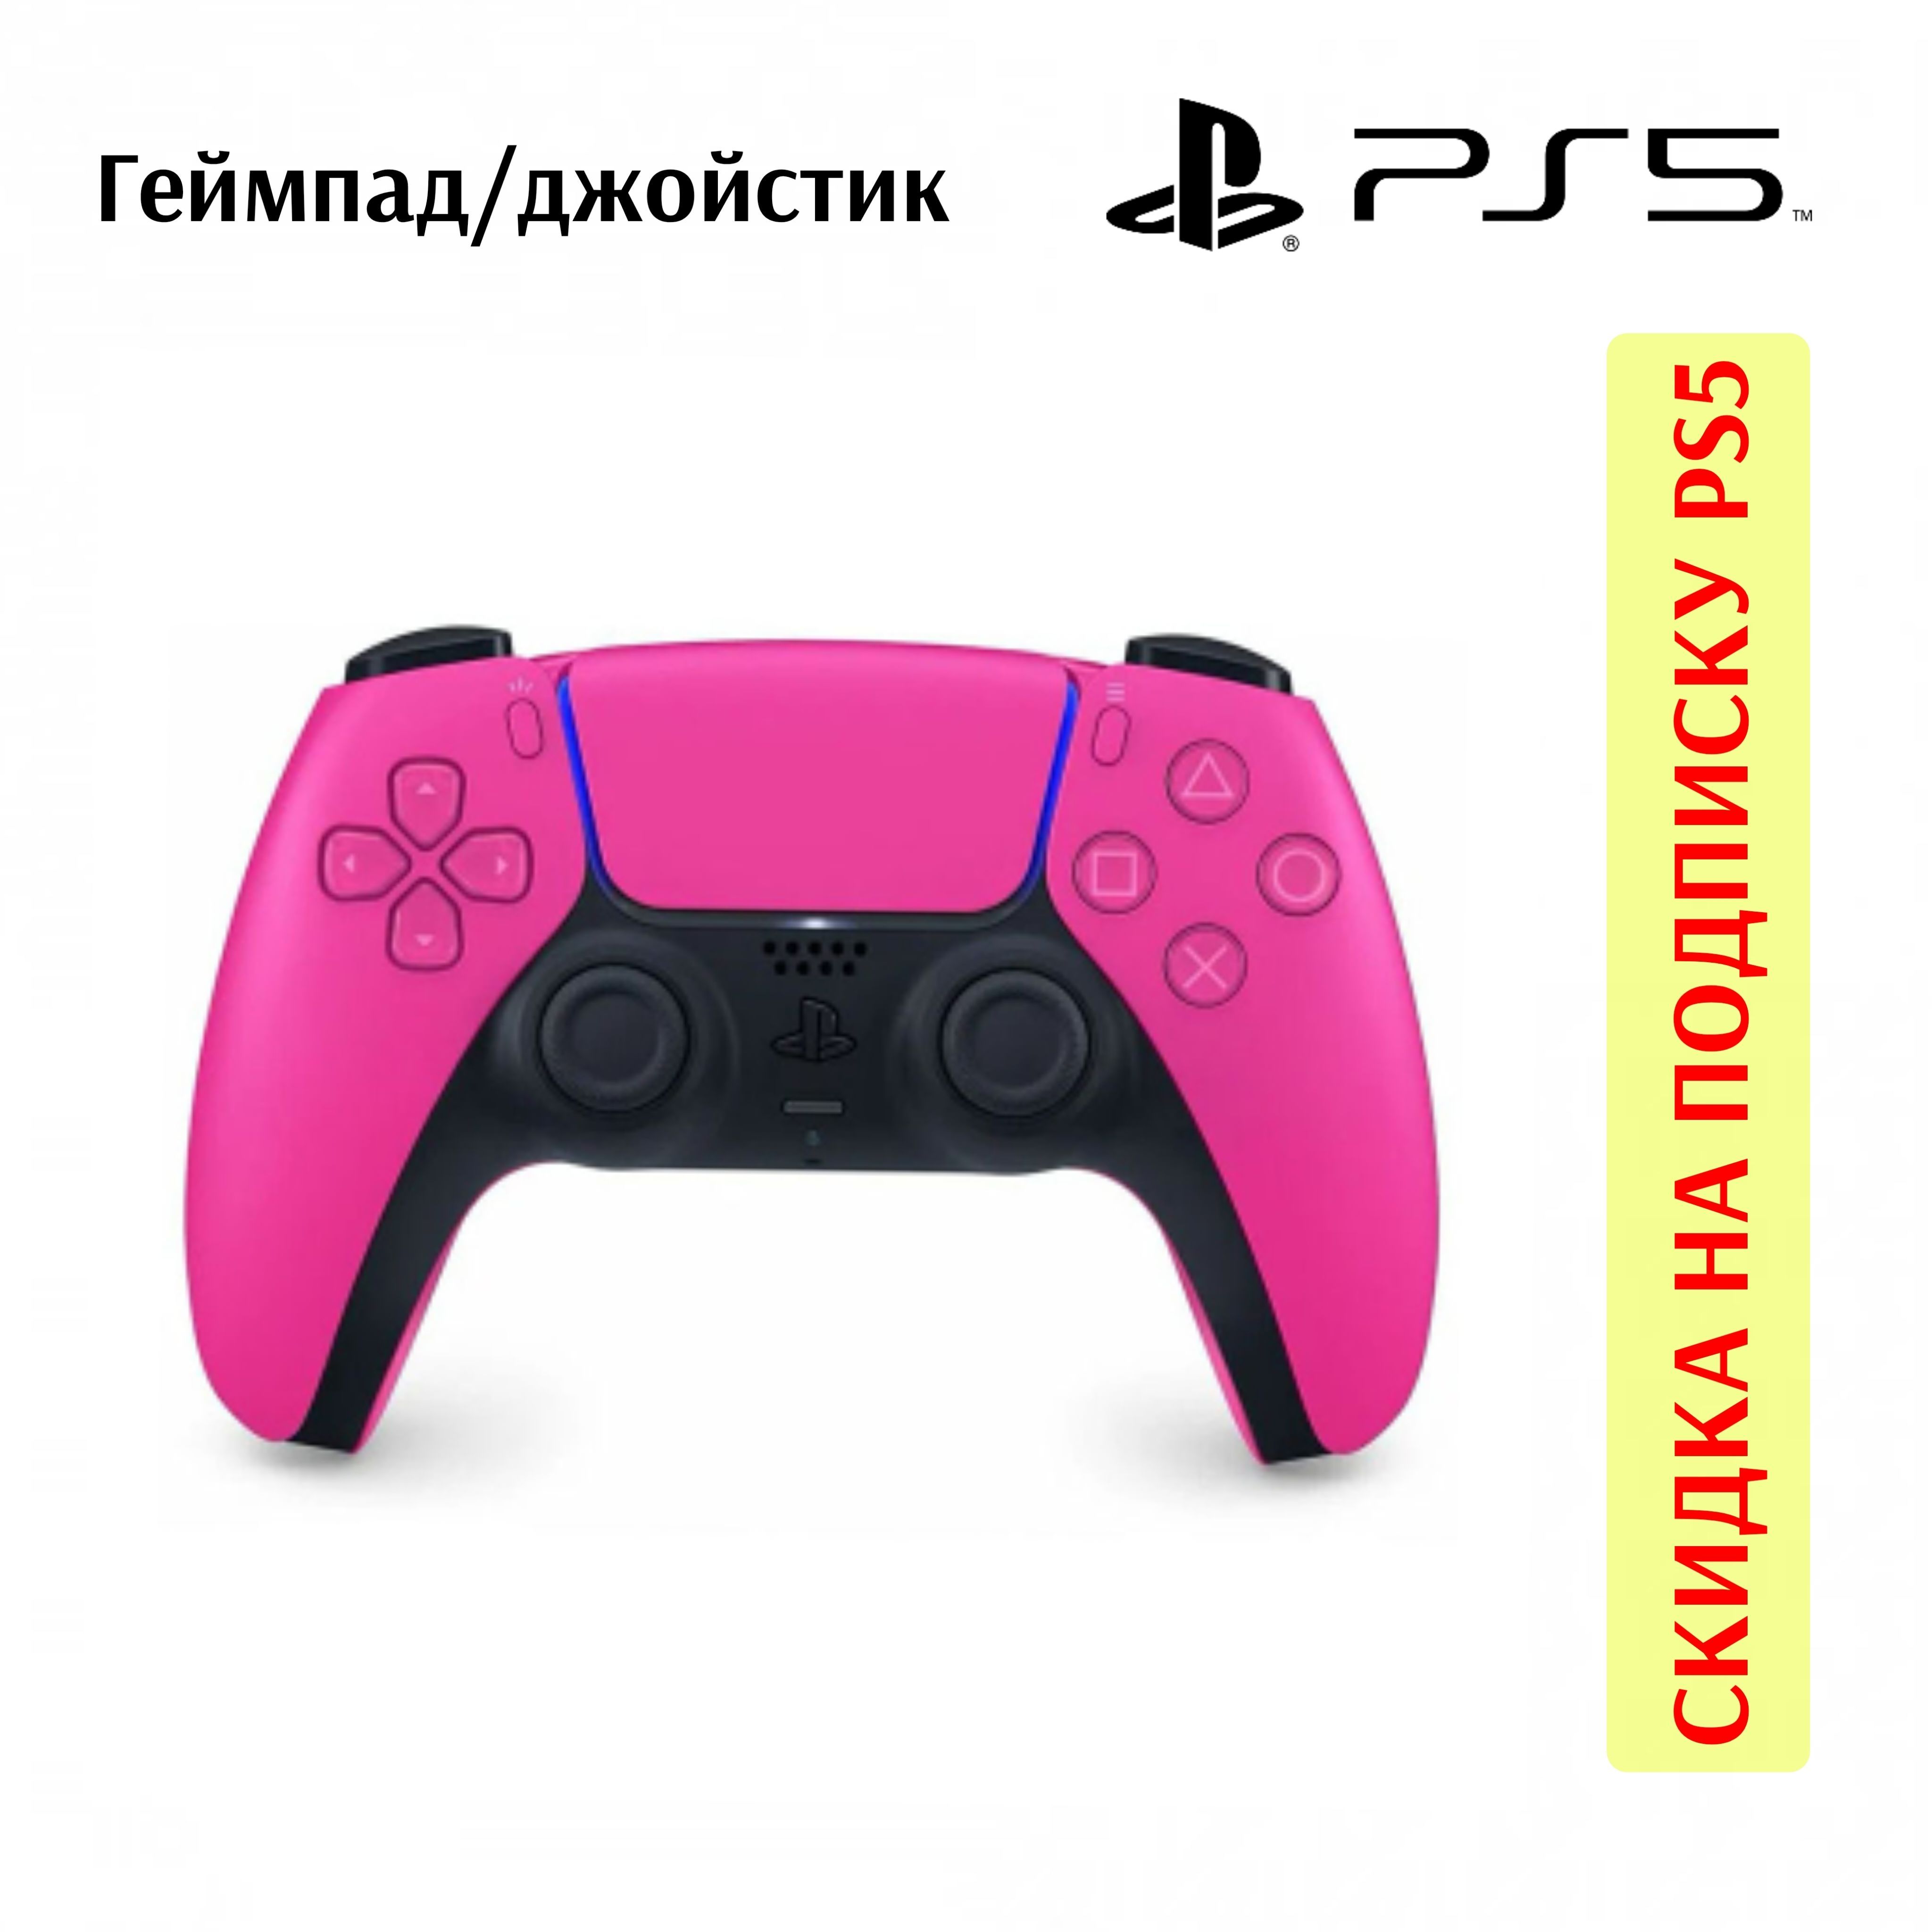 Ps5 wireless. Sony PLAYSTATION 5 геймпад. Геймпад Sony Dualsense ps5. Sony PLAYSTATION 5 Dualsense. Геймпад Sony PLAYSTATION 5 Dualsense White.